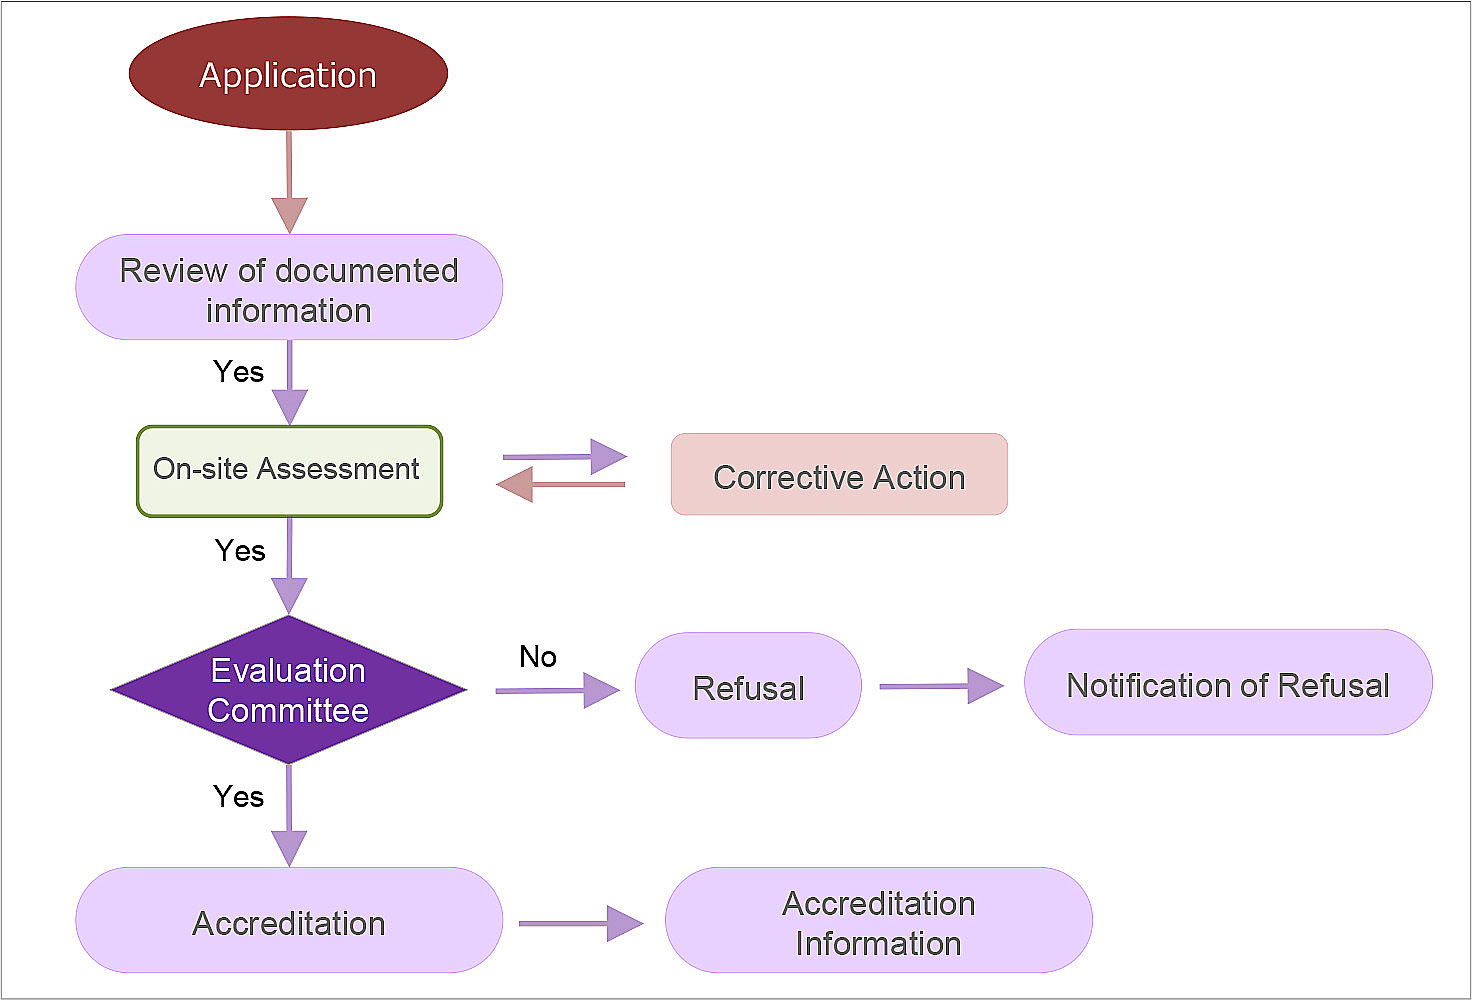 Outline of the process from application to accreditation